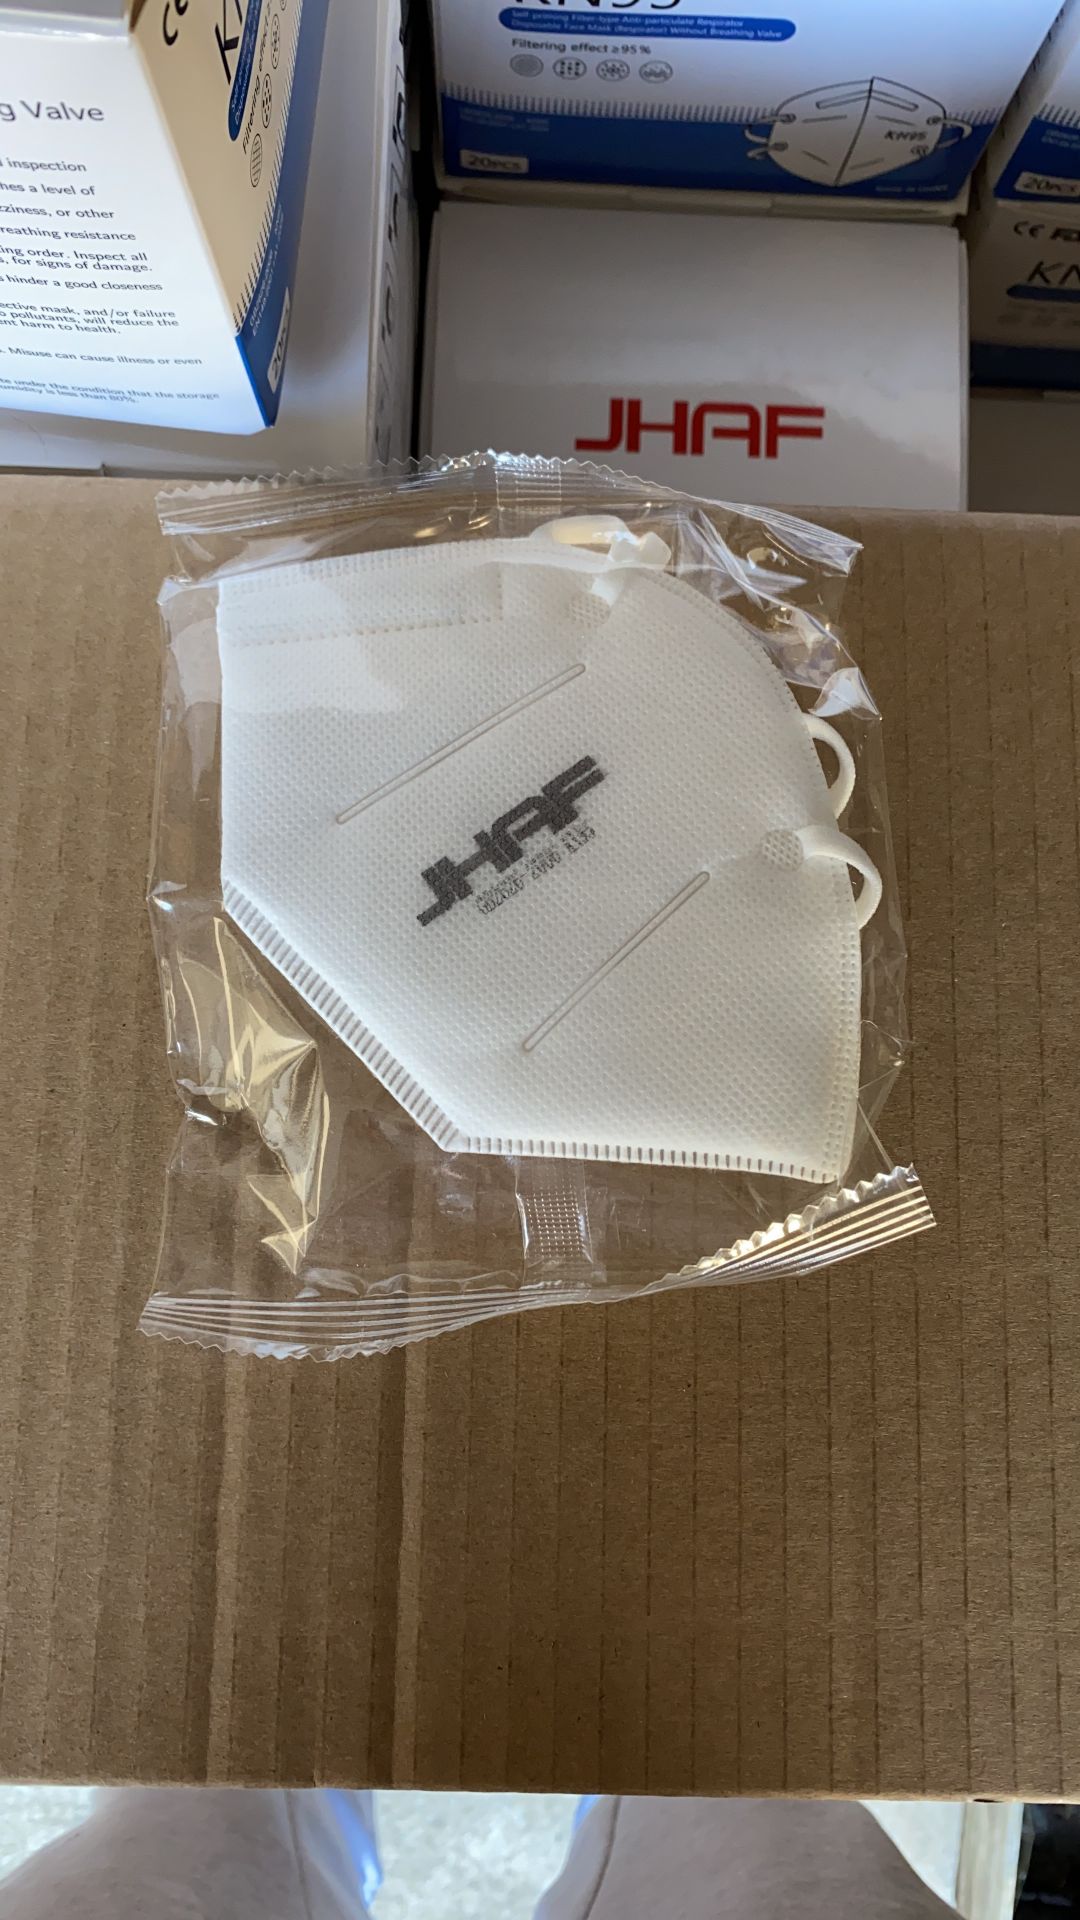 2880 JHAF Type KN95 Disposable Face Coverings